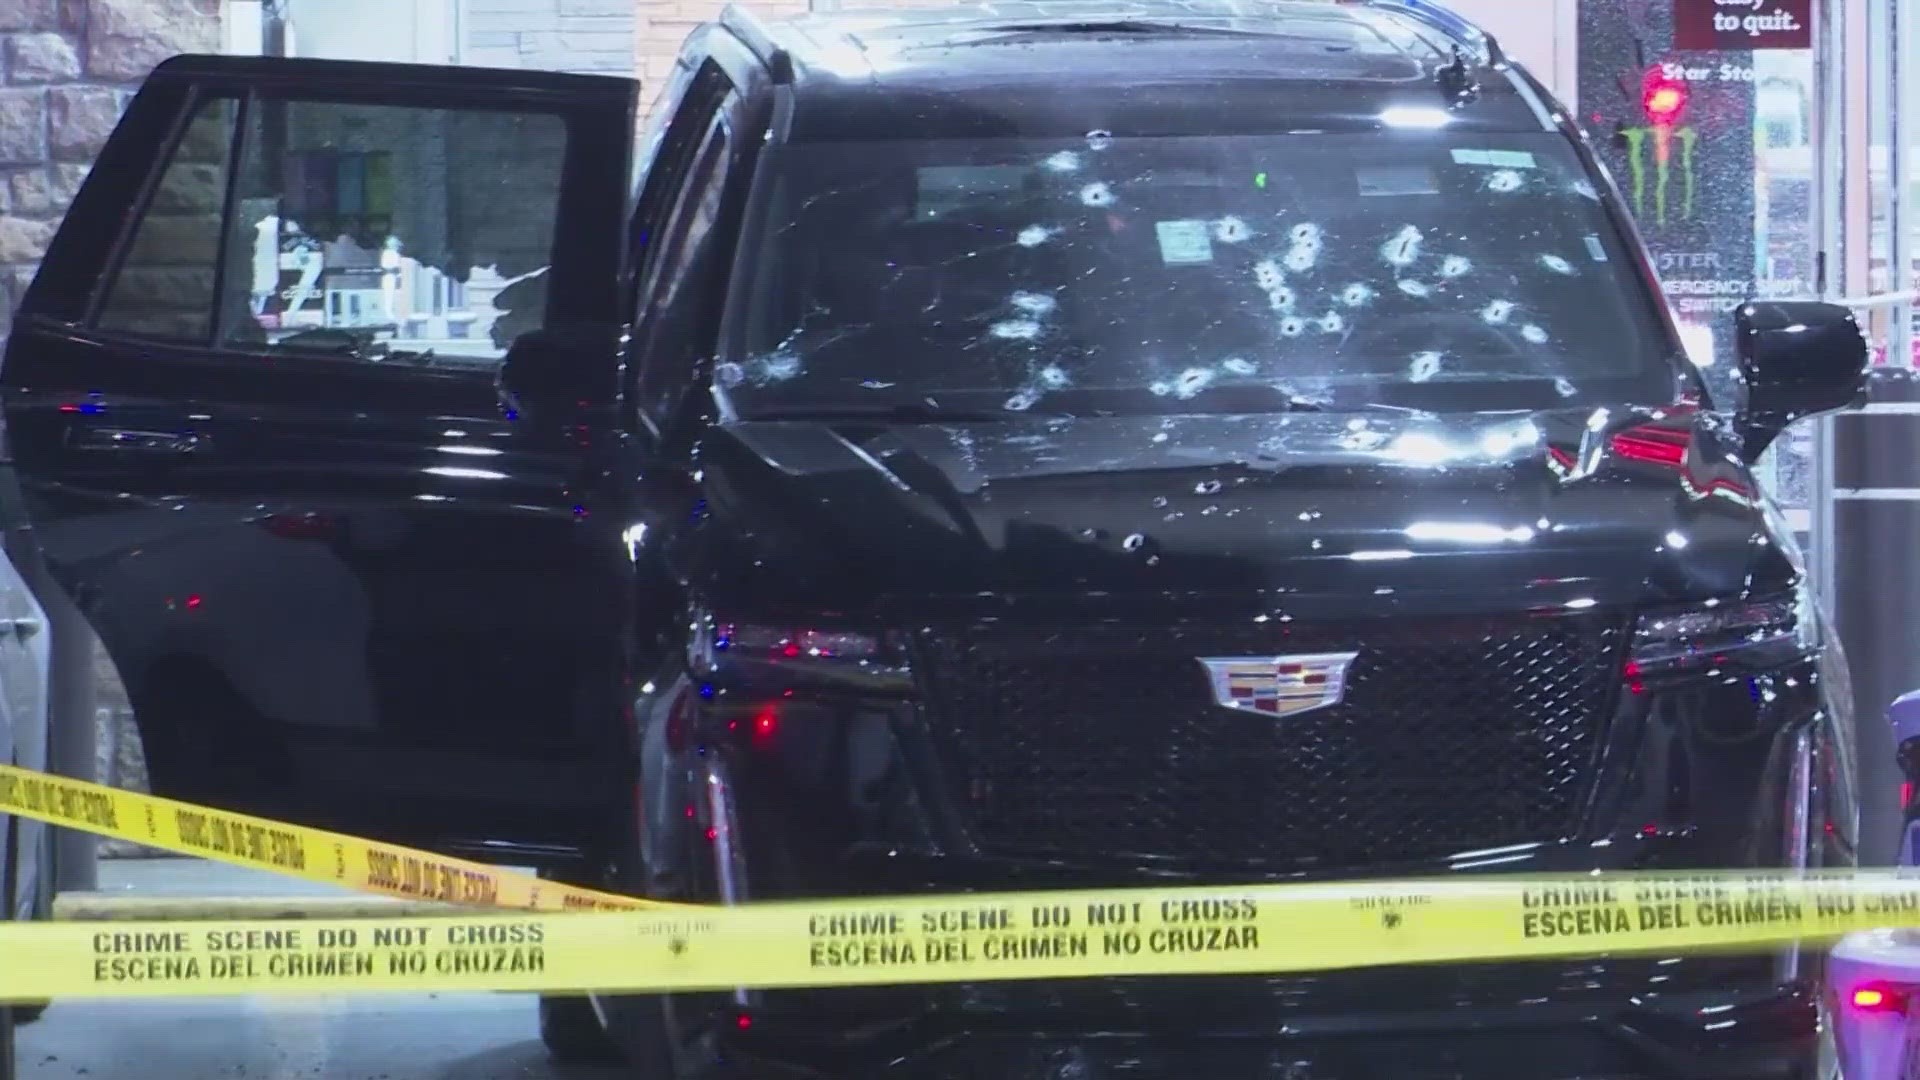 Luis Alfredo Pacheco Rojas, 34, was killed and another man was critically injured Monday when 3 gunmen surrounded their SUV on South Wayside and started shooting.